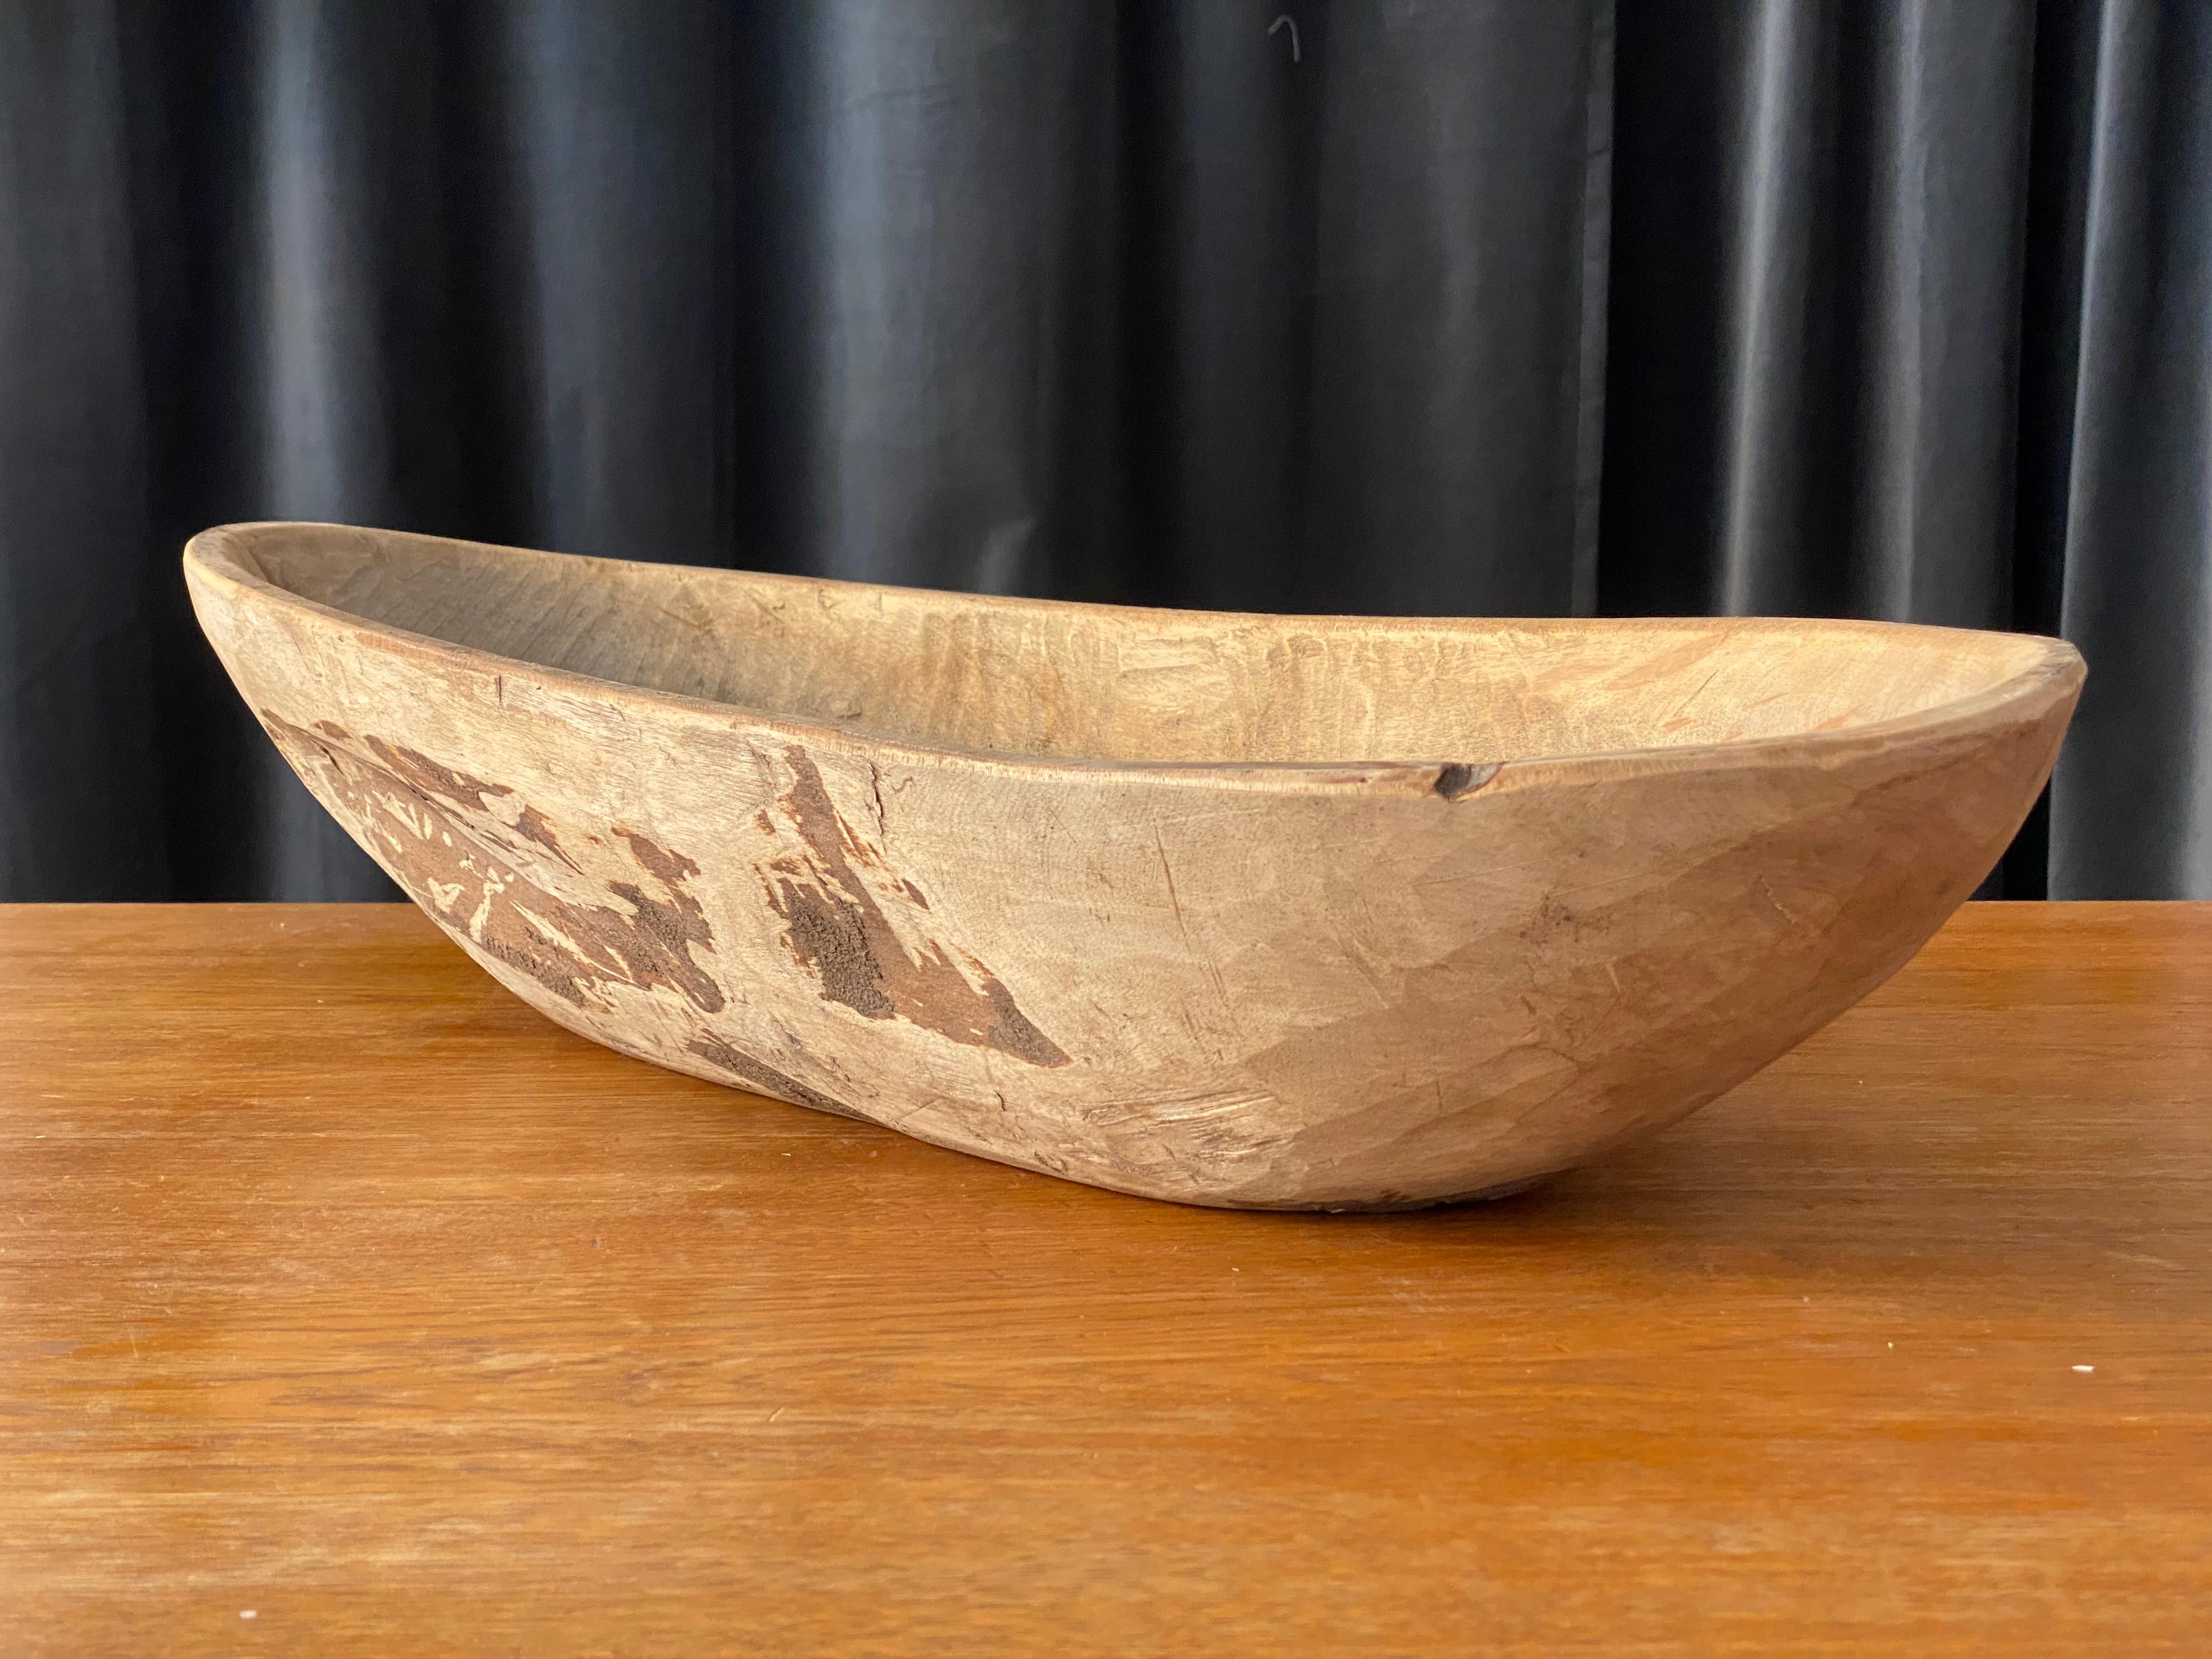 A unique large organic and early farmers wooden bowl. Signed by the artist 